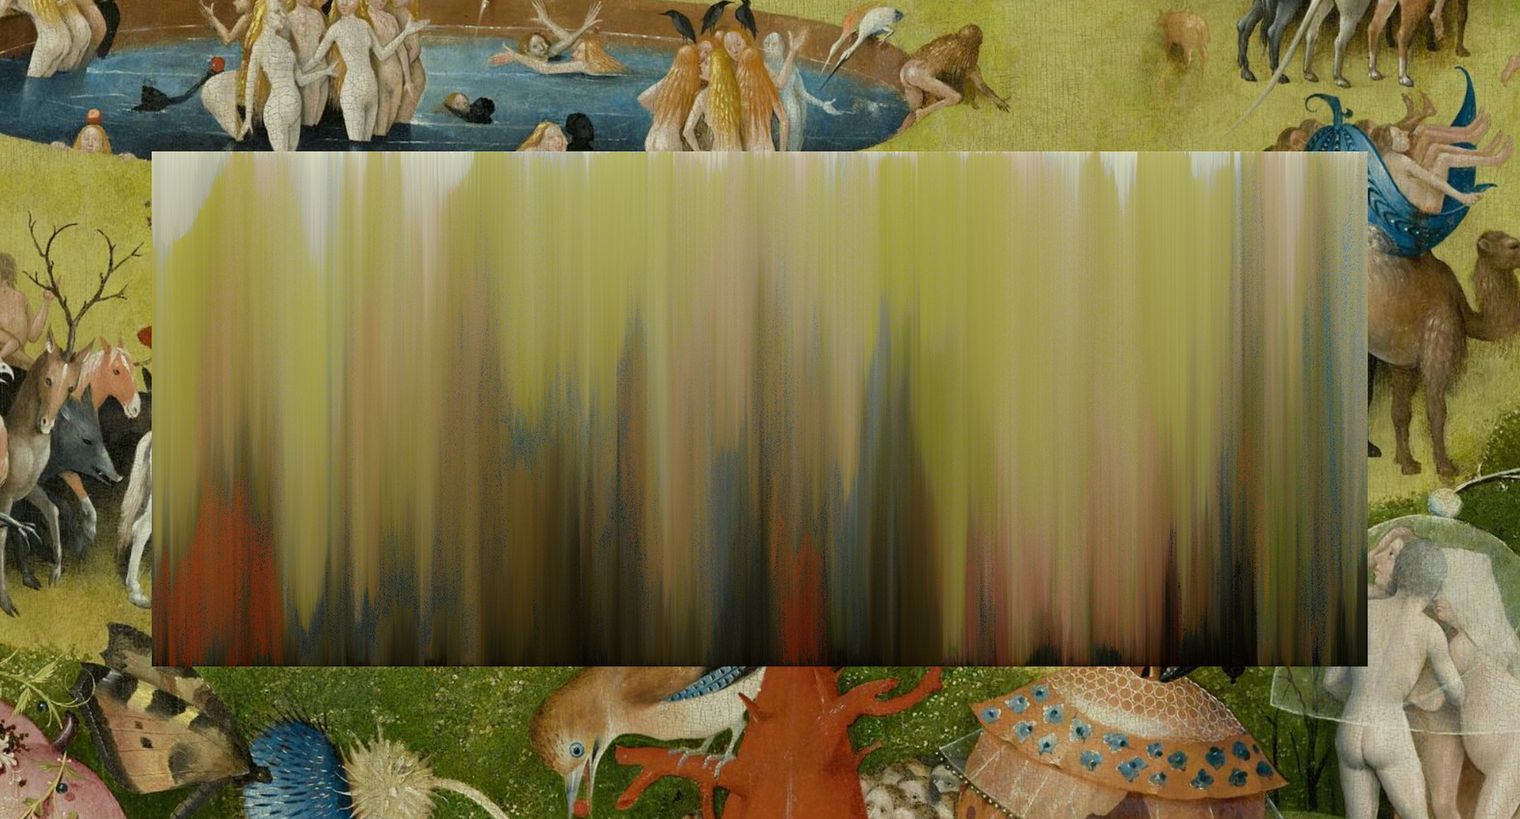 crop from the garden of earthly delights with a pixel sorted color gradient